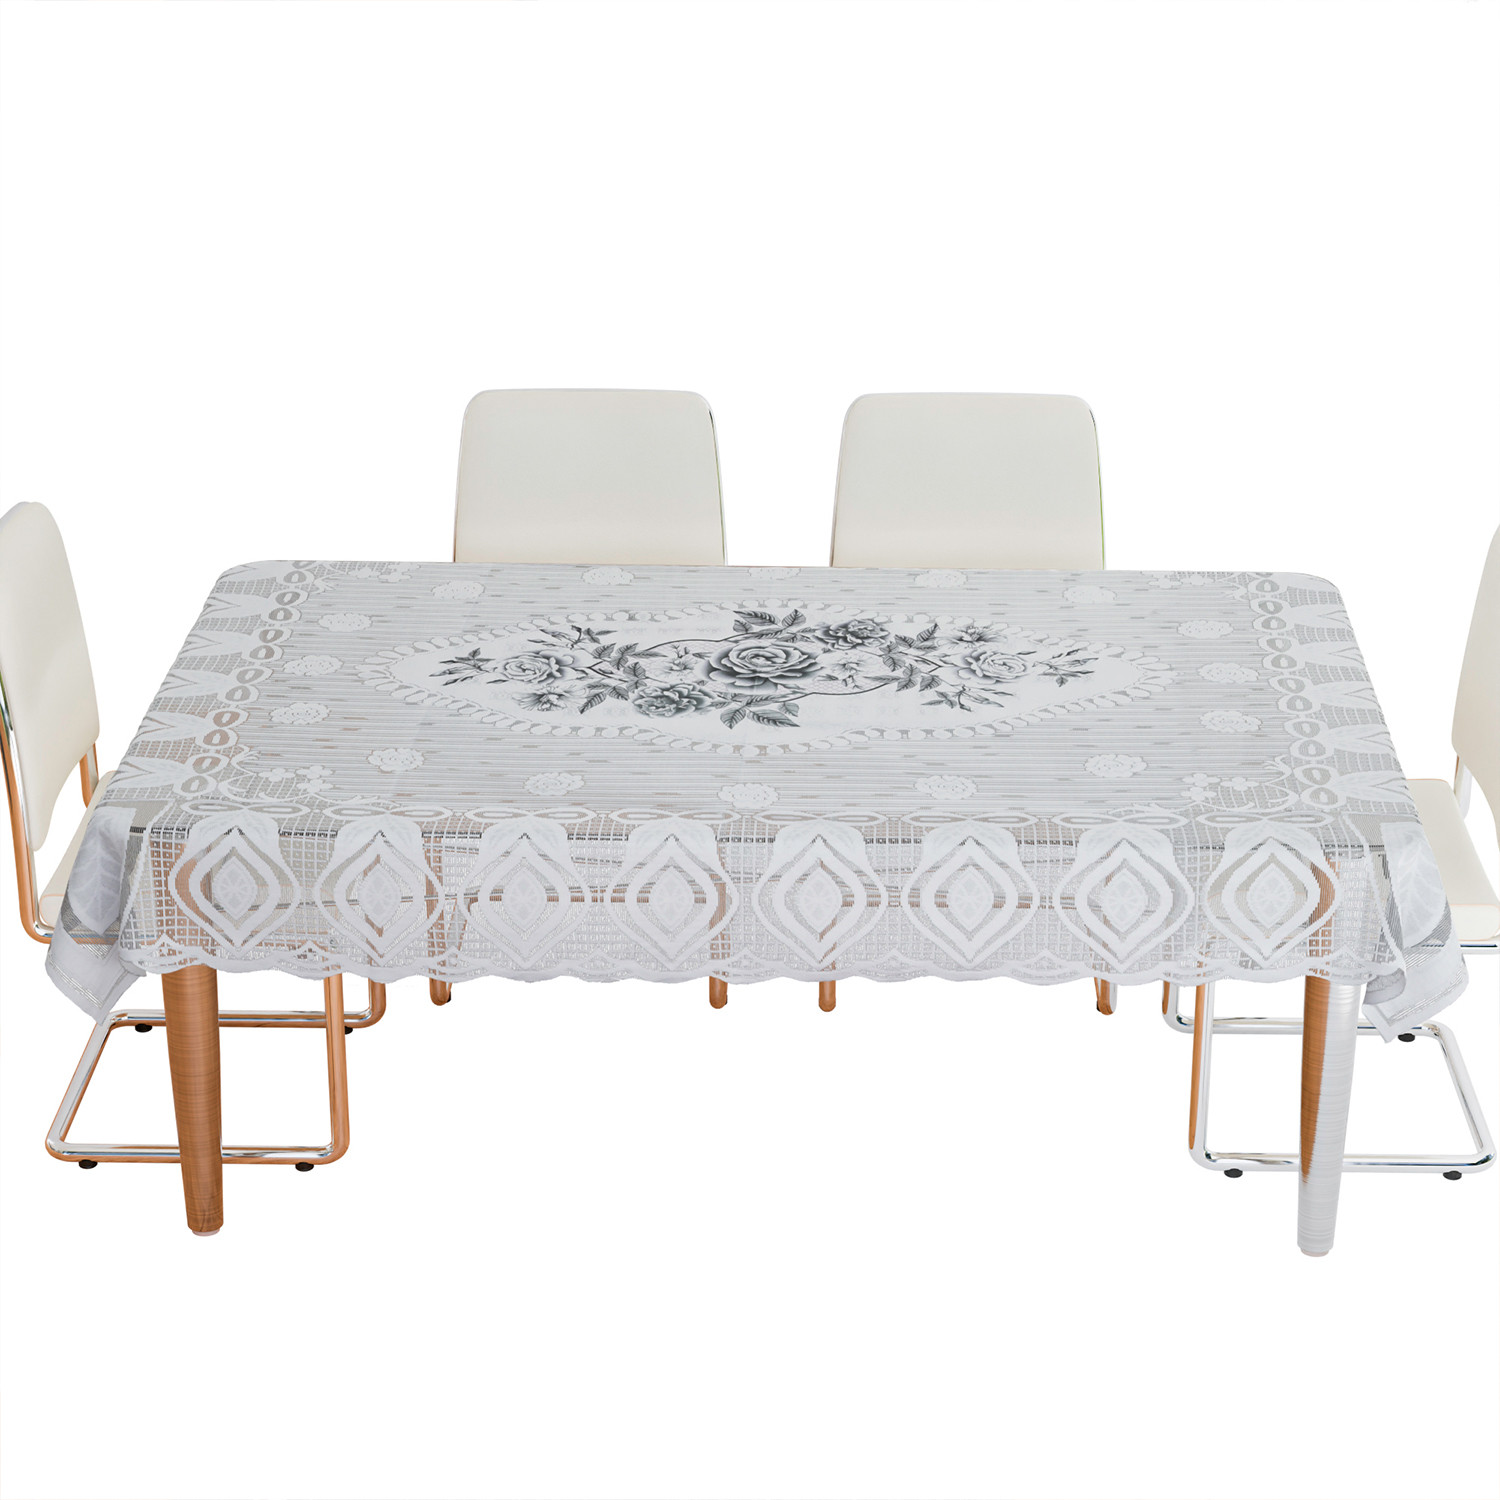 Kuber Industries Dining Table Cover | Cotton Table Cloth Cover | 6-Seater Table Cloth | Glory Table Cover | Table Protector | Table Cover for Dining Table | 60x90 Inch | DTC | White & Gray